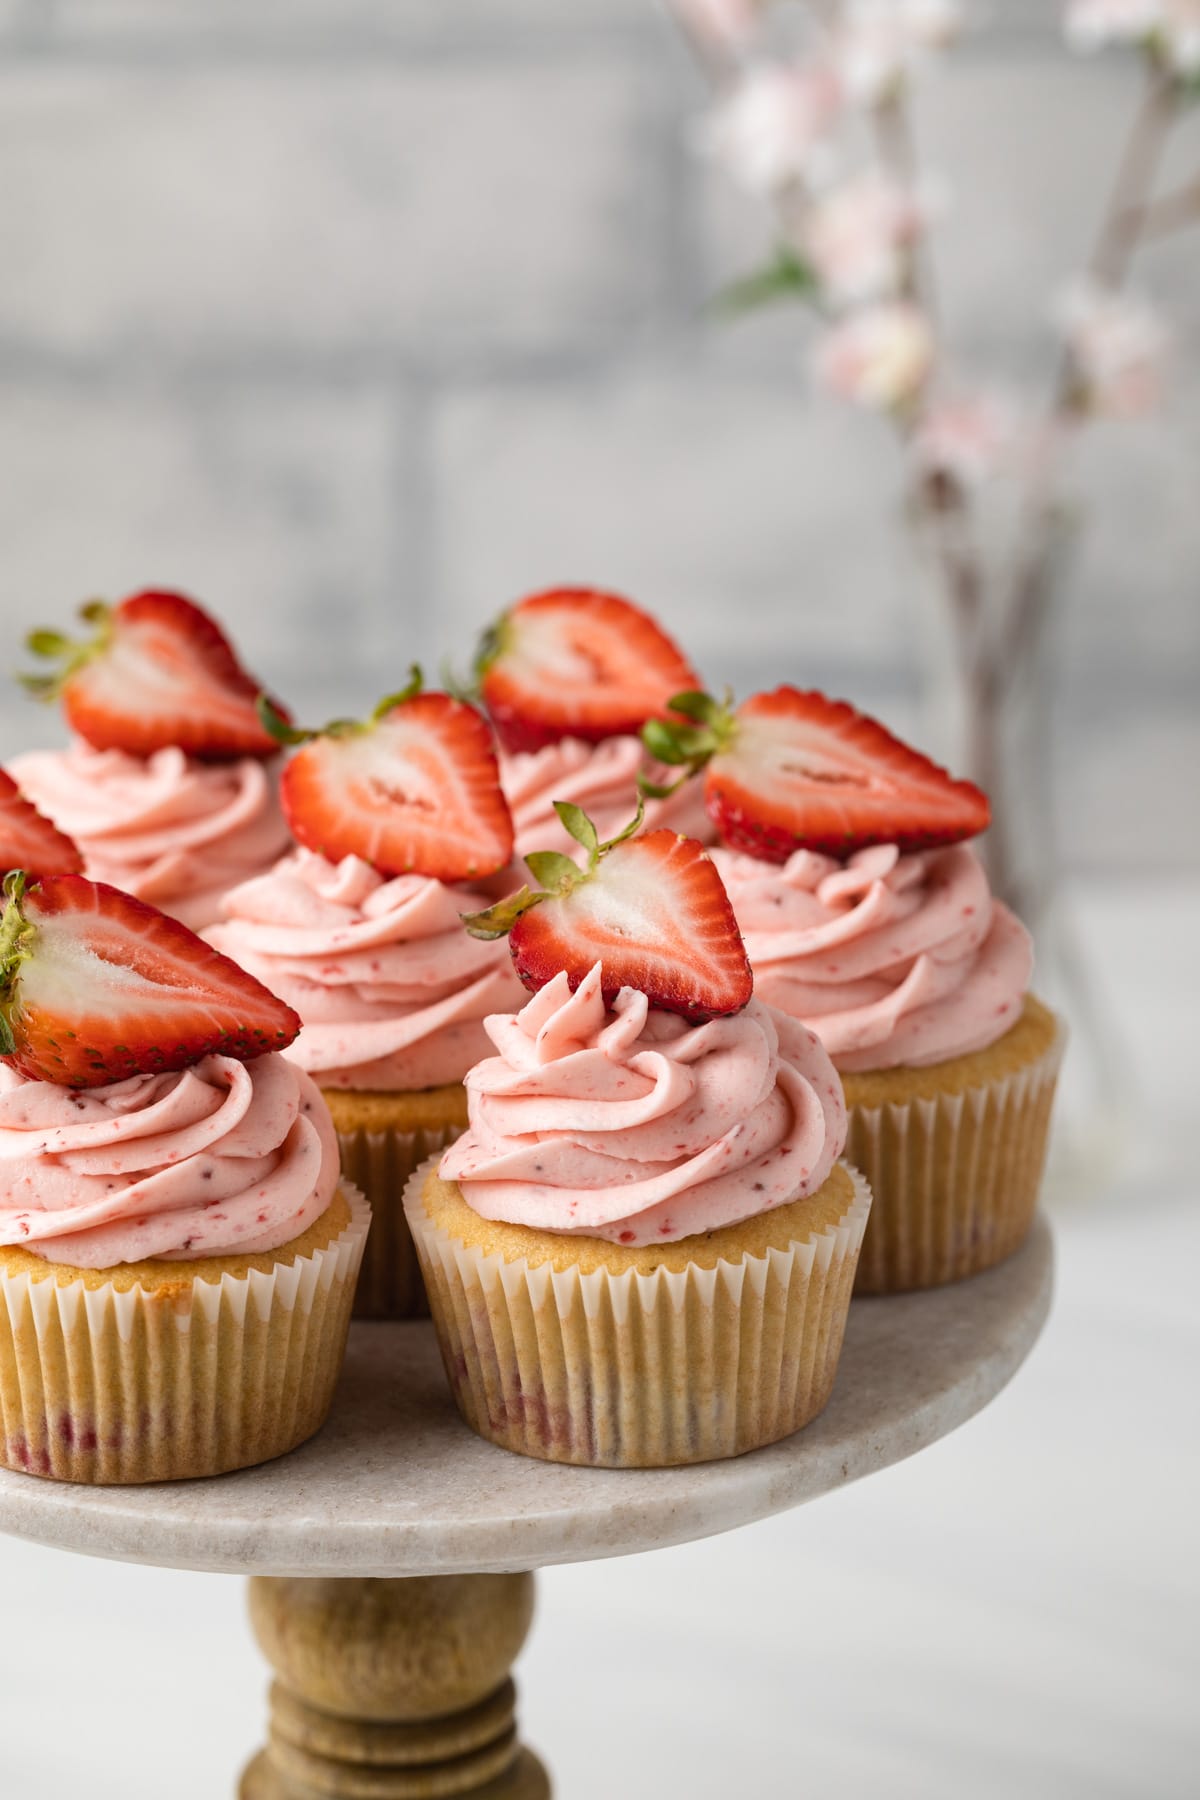 Angled view of strawberry cupcakes on cake stand.